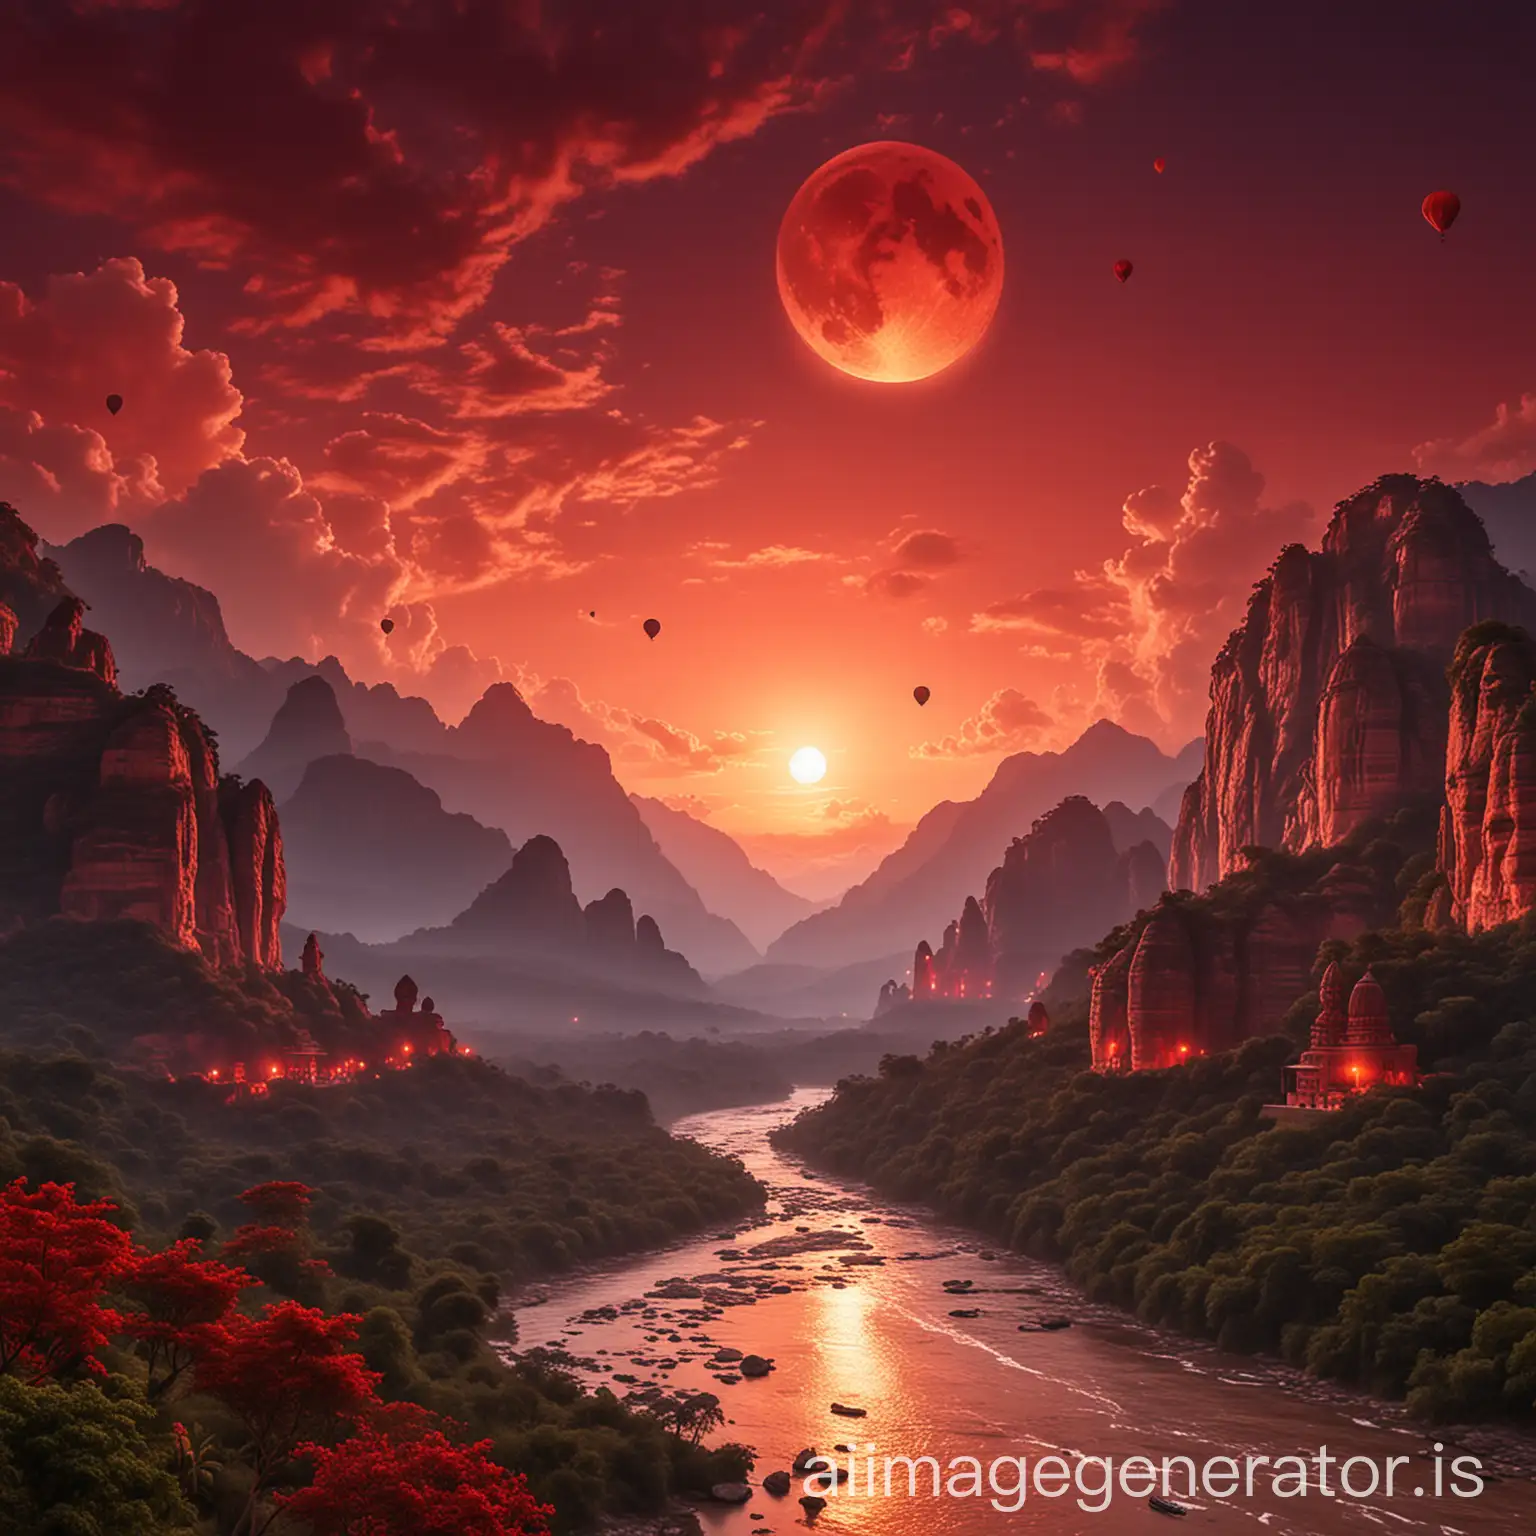 Red cloudy sky with red moon and red mountains with hot balloons on sky, red jungle with big bajrangbali statue with flowing river